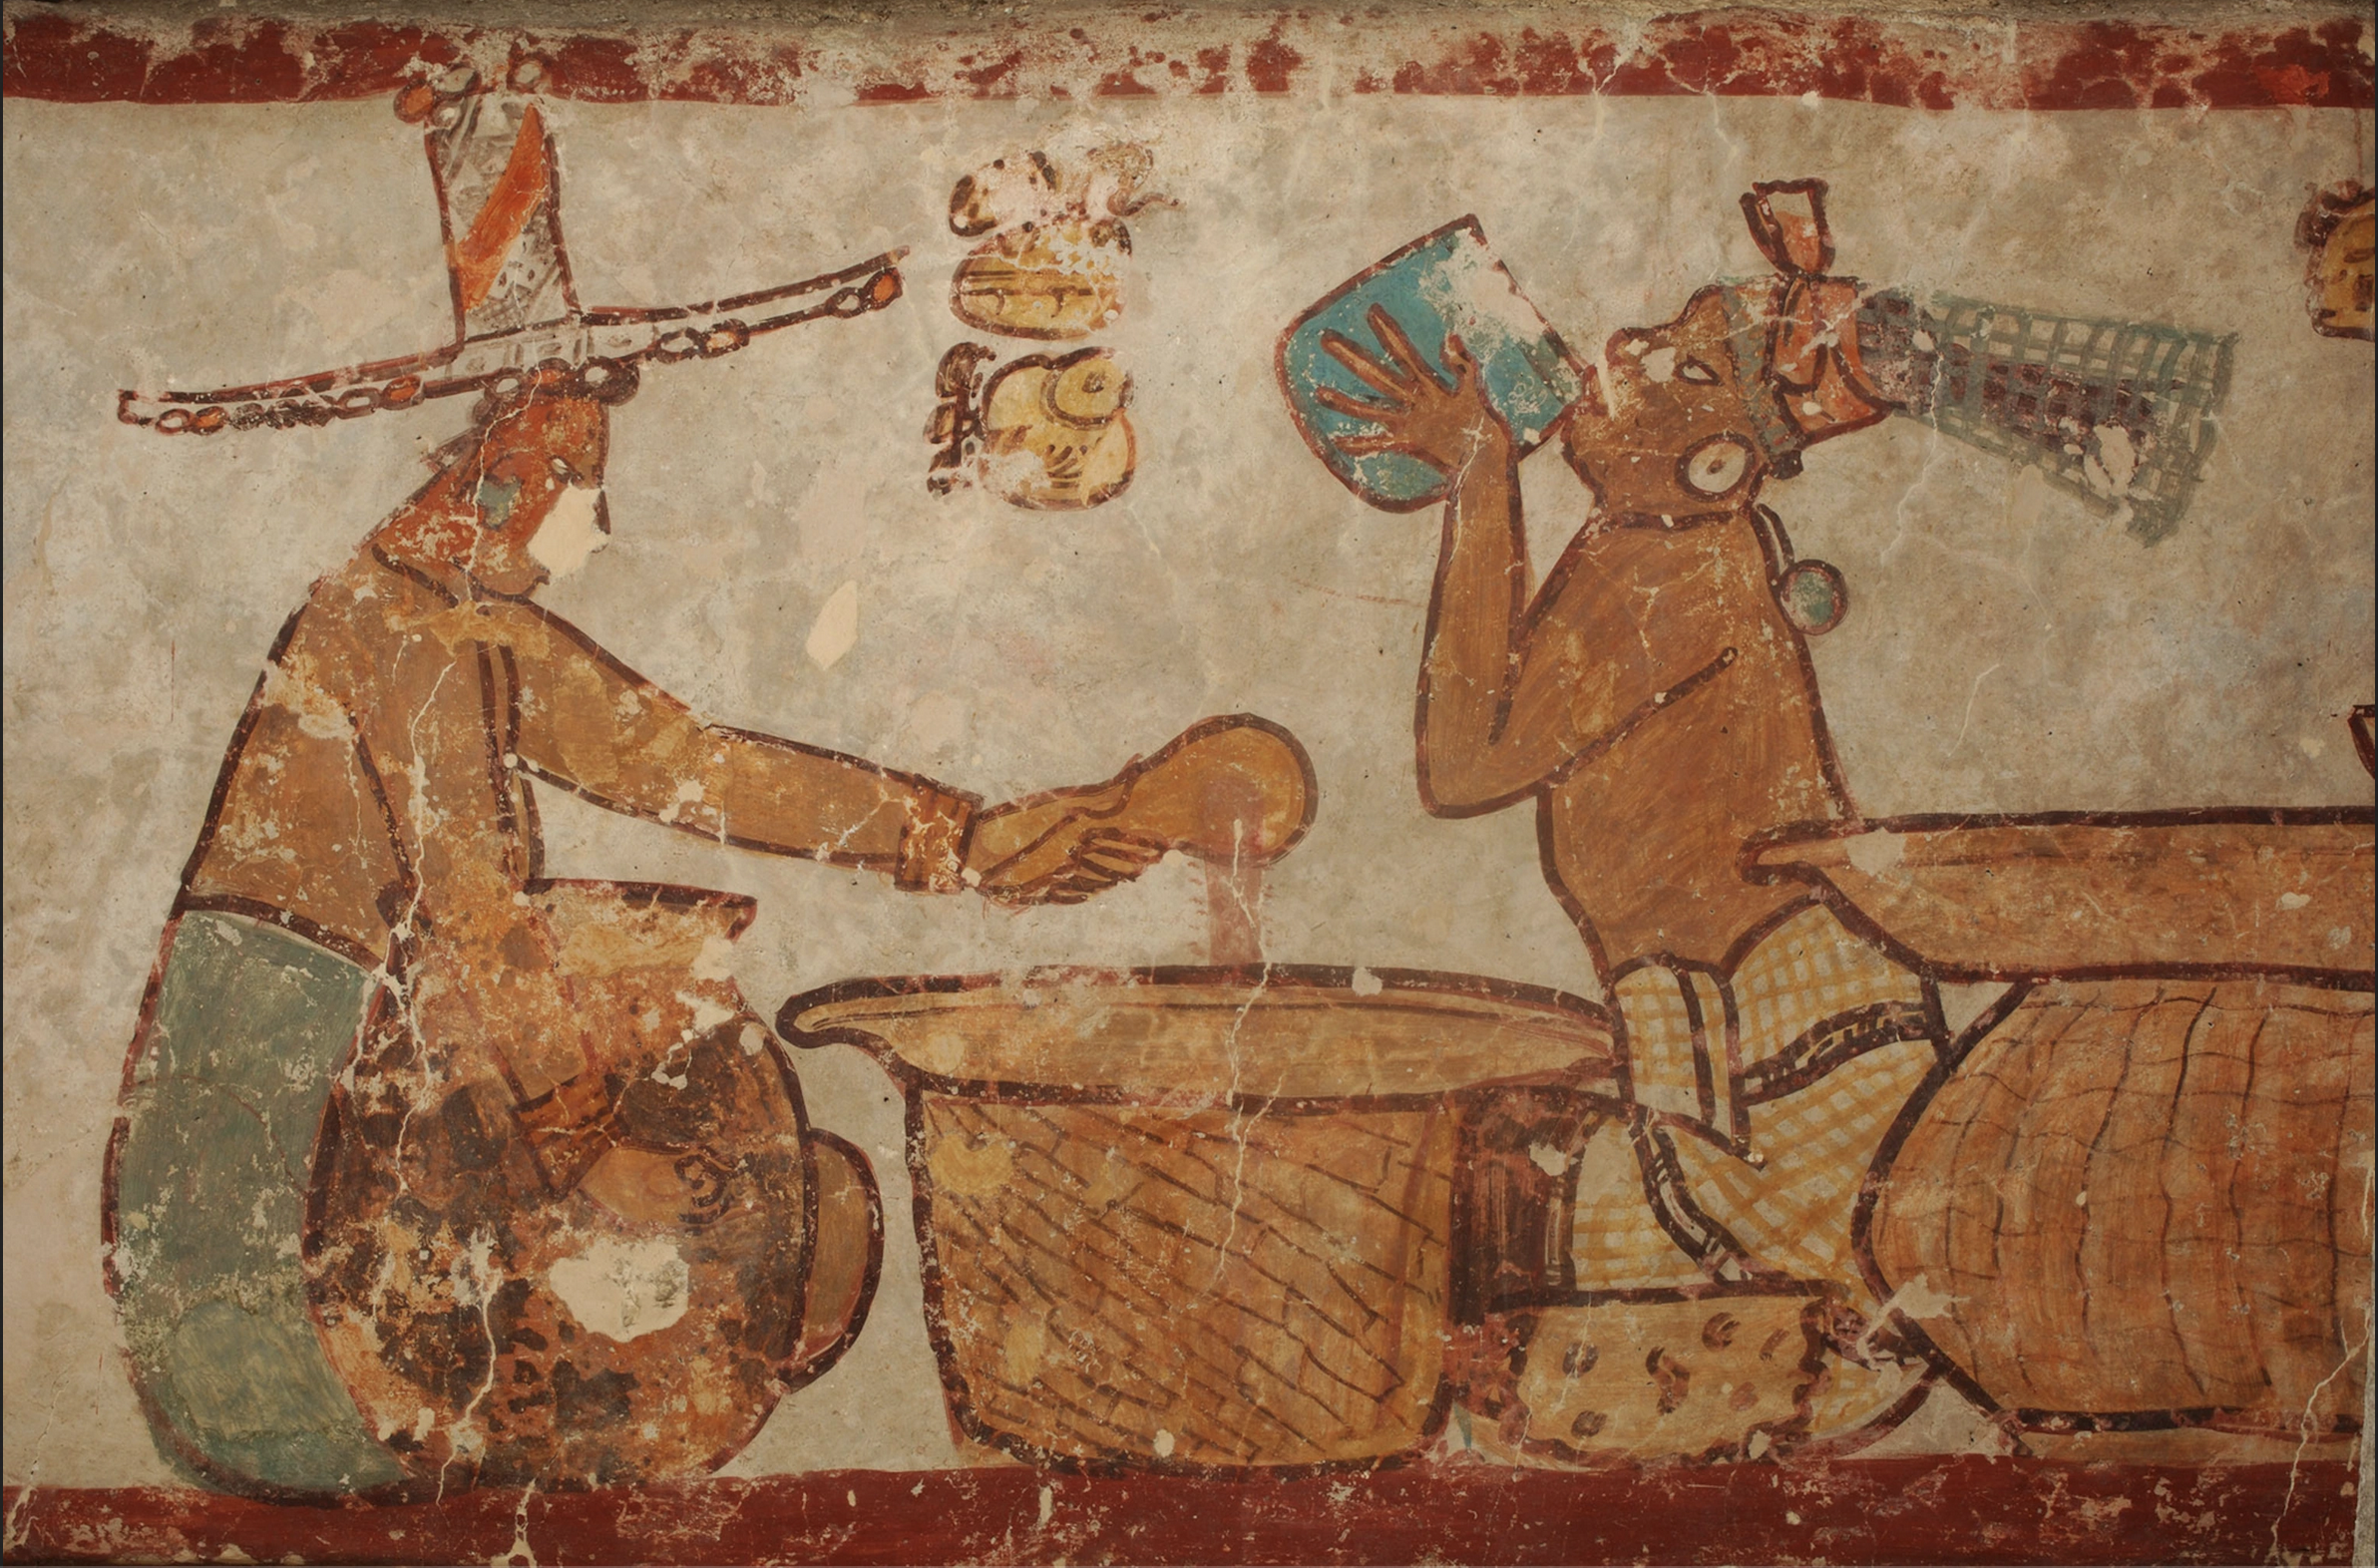 Painting from the ancient Maya city of Calakmul depict the preparation and drinking of cacao.